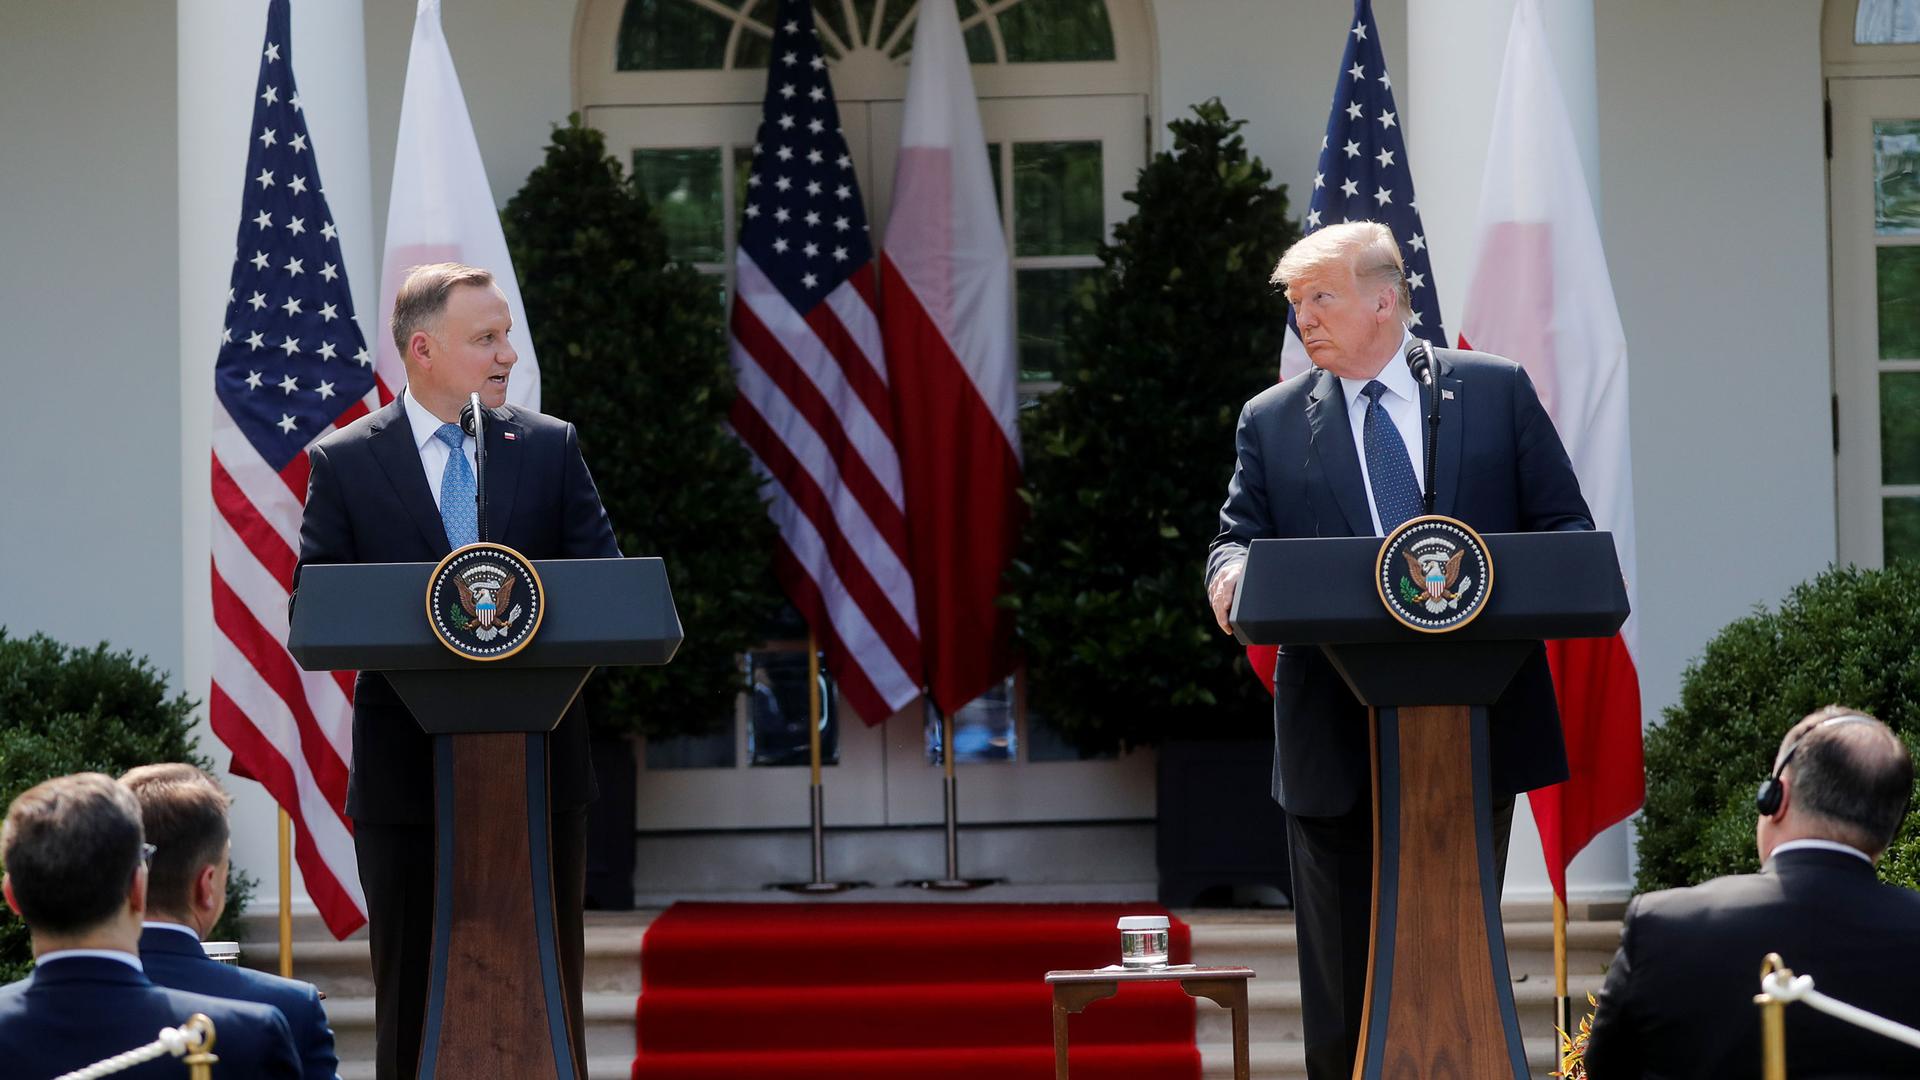 US President Donald Trump and Poland's President Andrzej Duda are shown standing at podiums across from each other with the White House in the background.